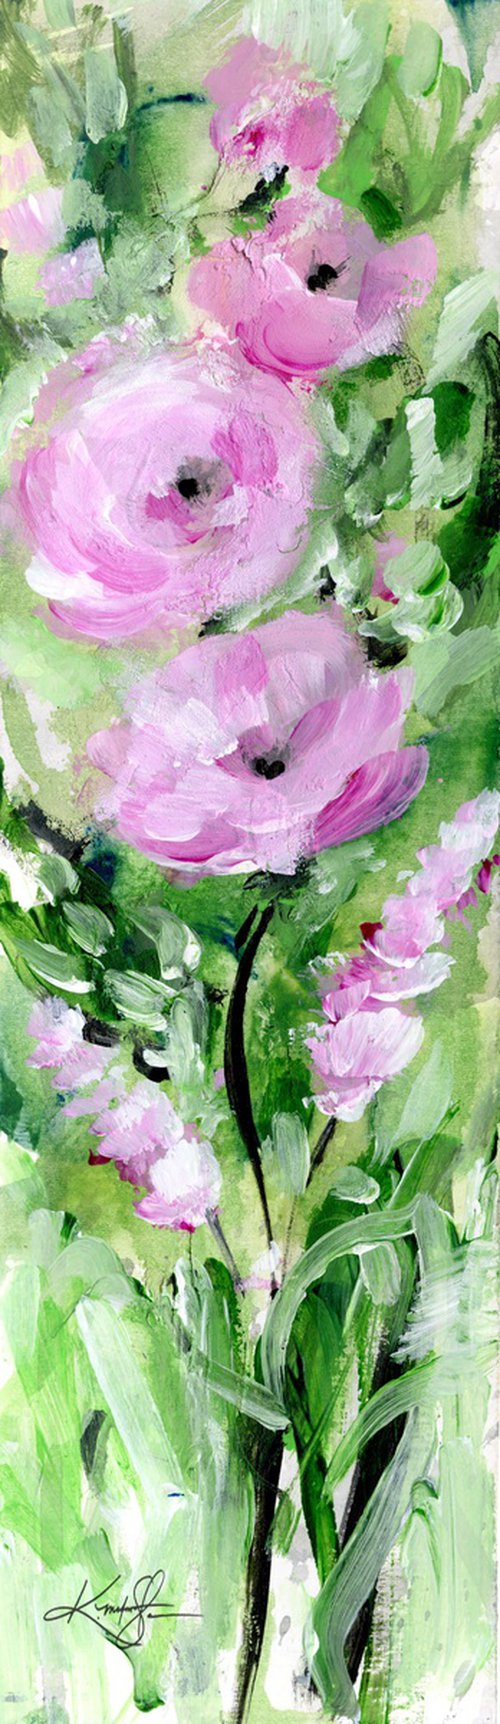 Floral Loveliness 15 by Kathy Morton Stanion